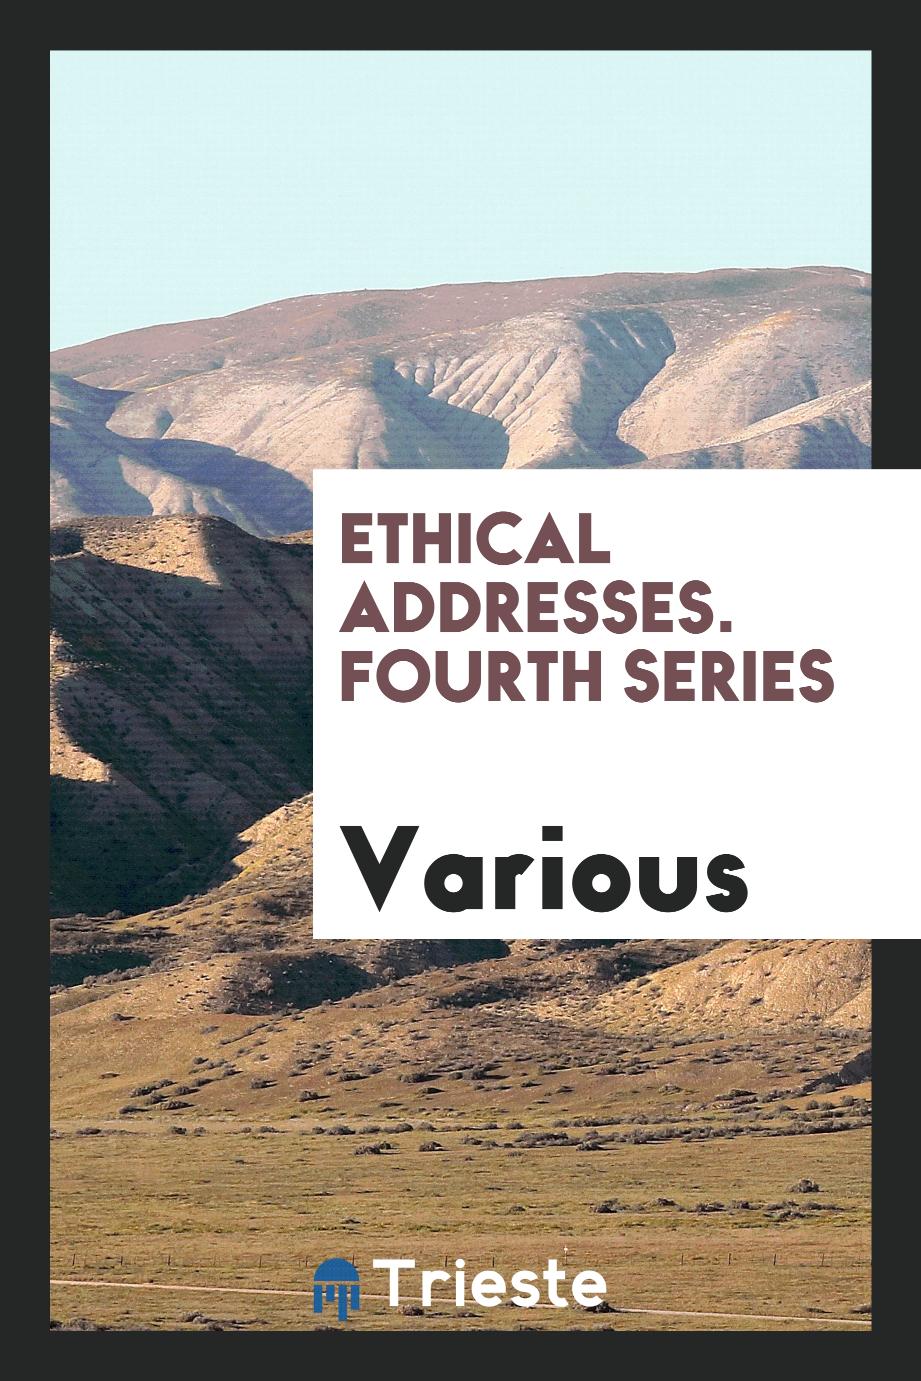 Ethical addresses. Fourth series